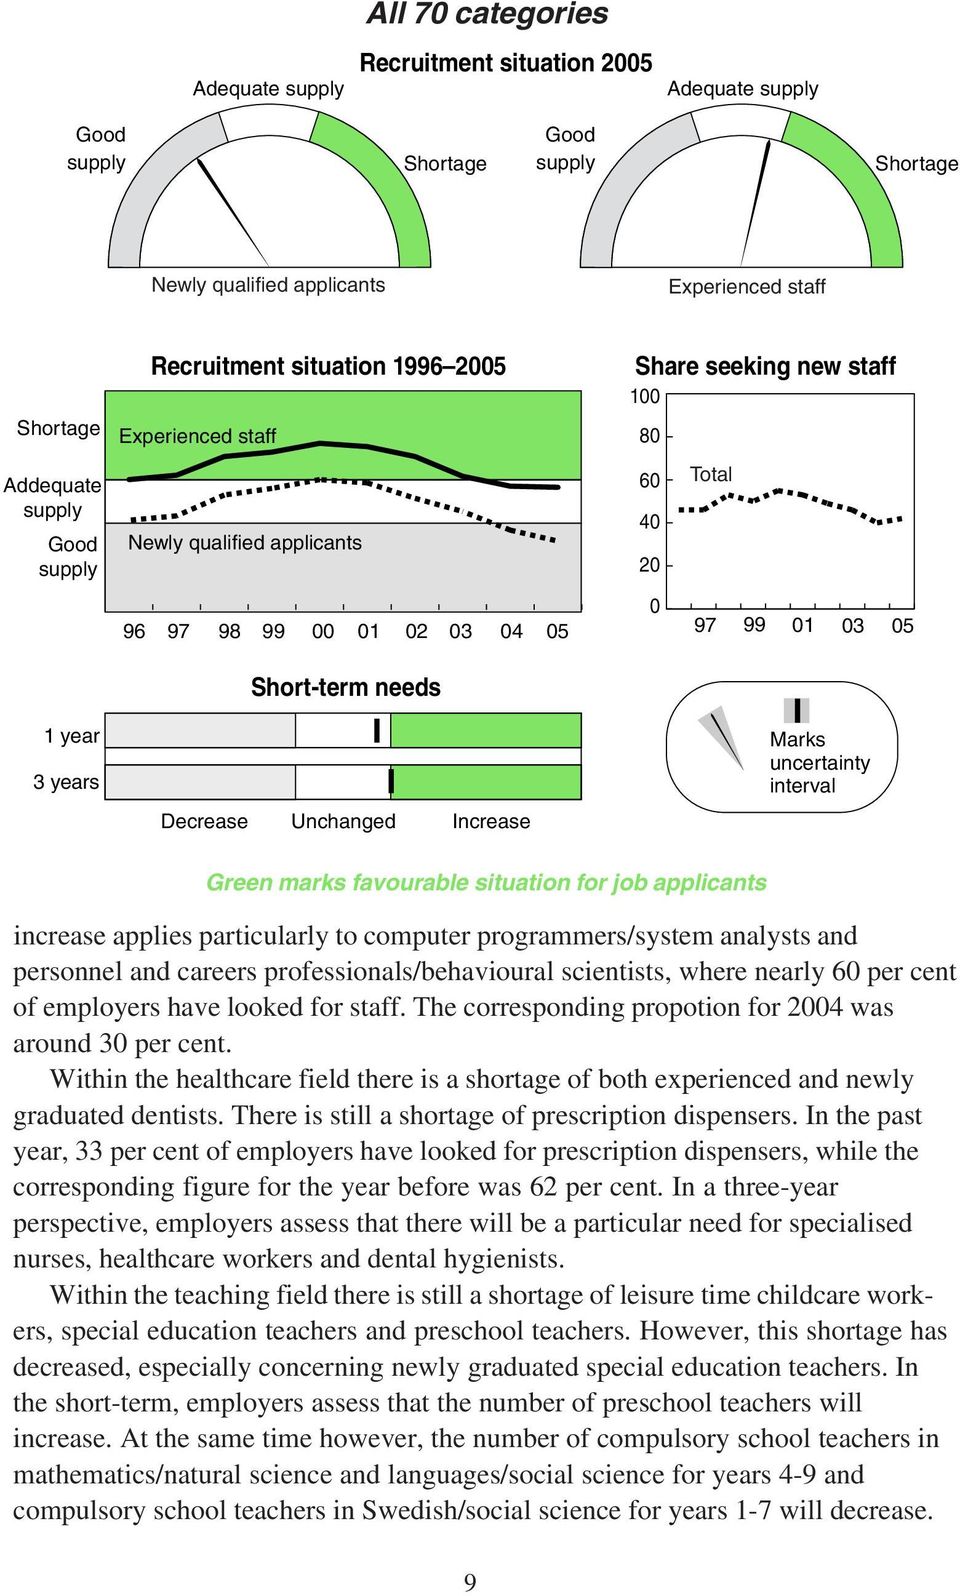 Increase Marks uncertainty interval Green marks favourable situation for job applicants increase applies particularly to computer programmers/system analysts and personnel and careers